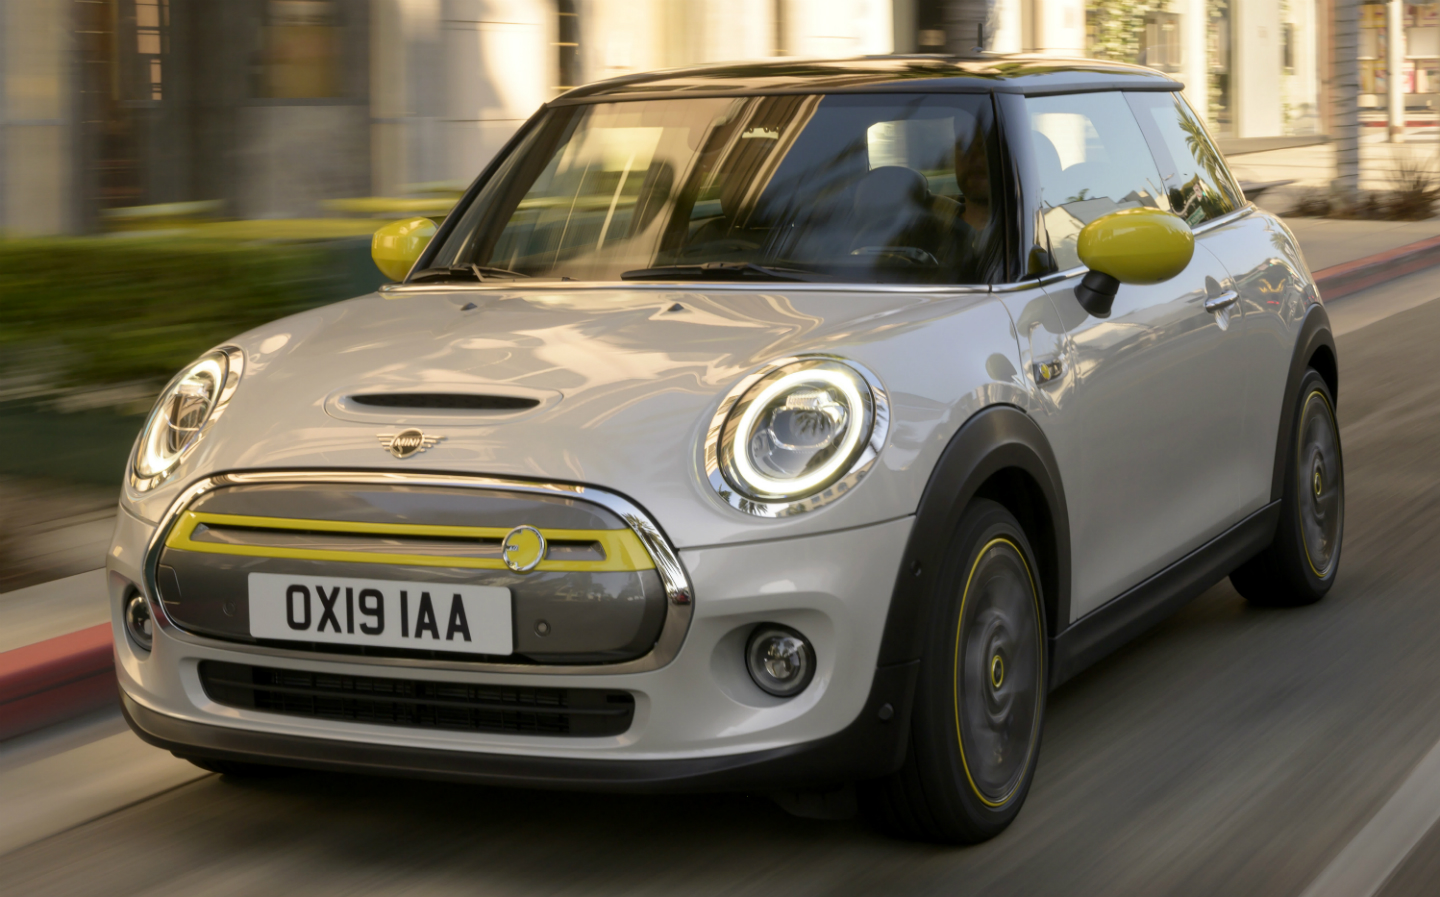 Sunday Times Motor Awards 2019 Best Electric Car of the Year. MINI Electric